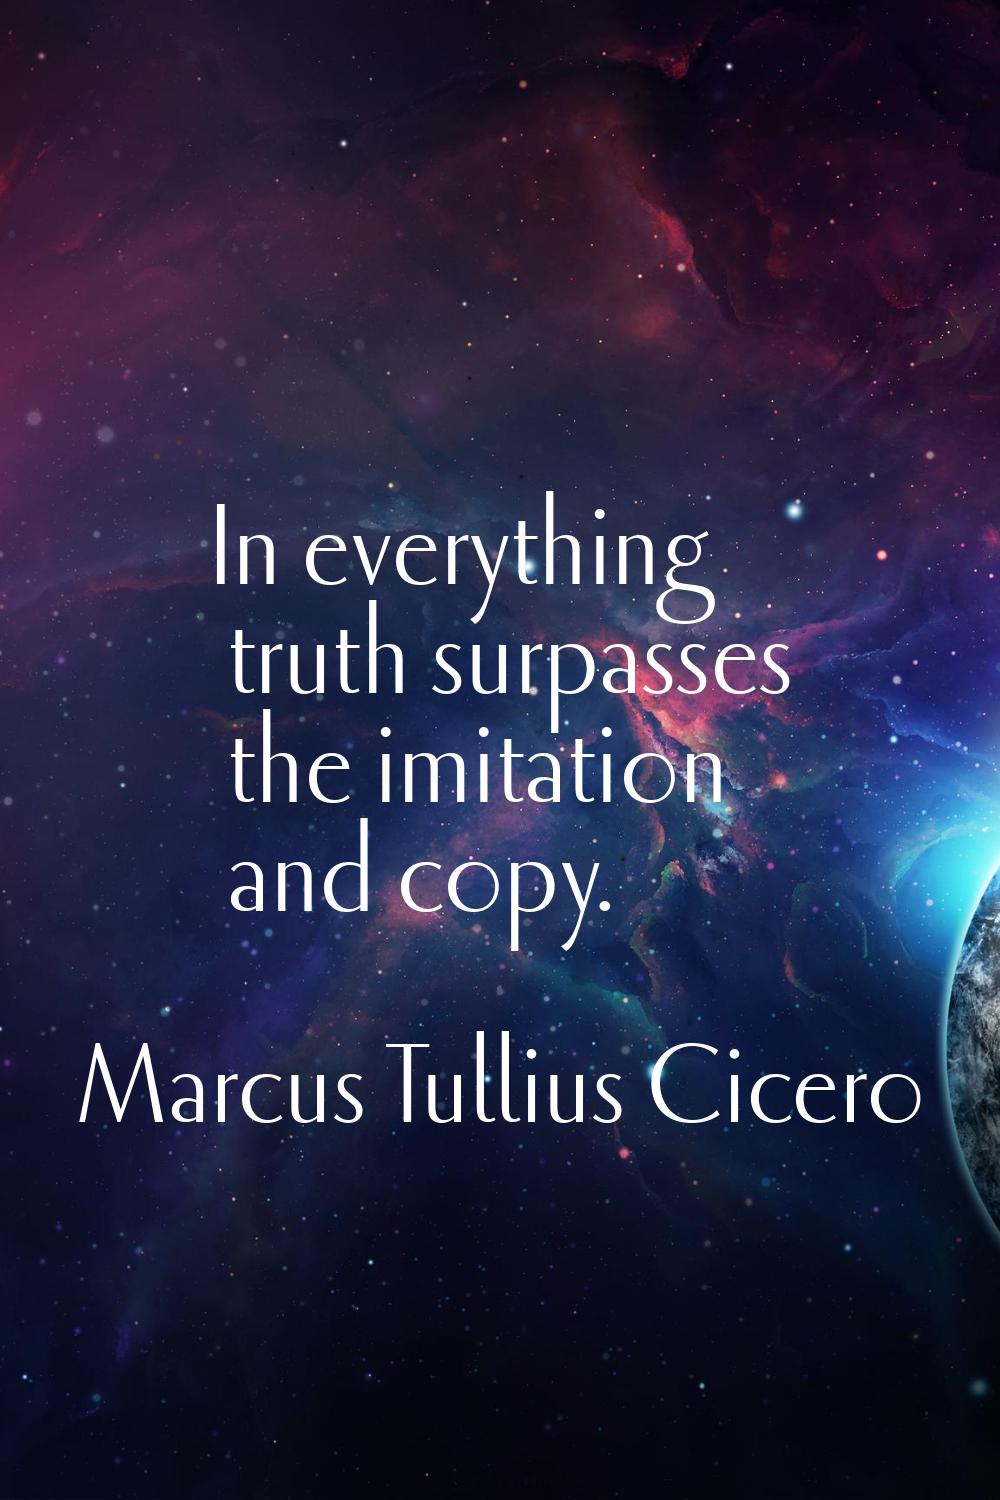 In everything truth surpasses the imitation and copy.